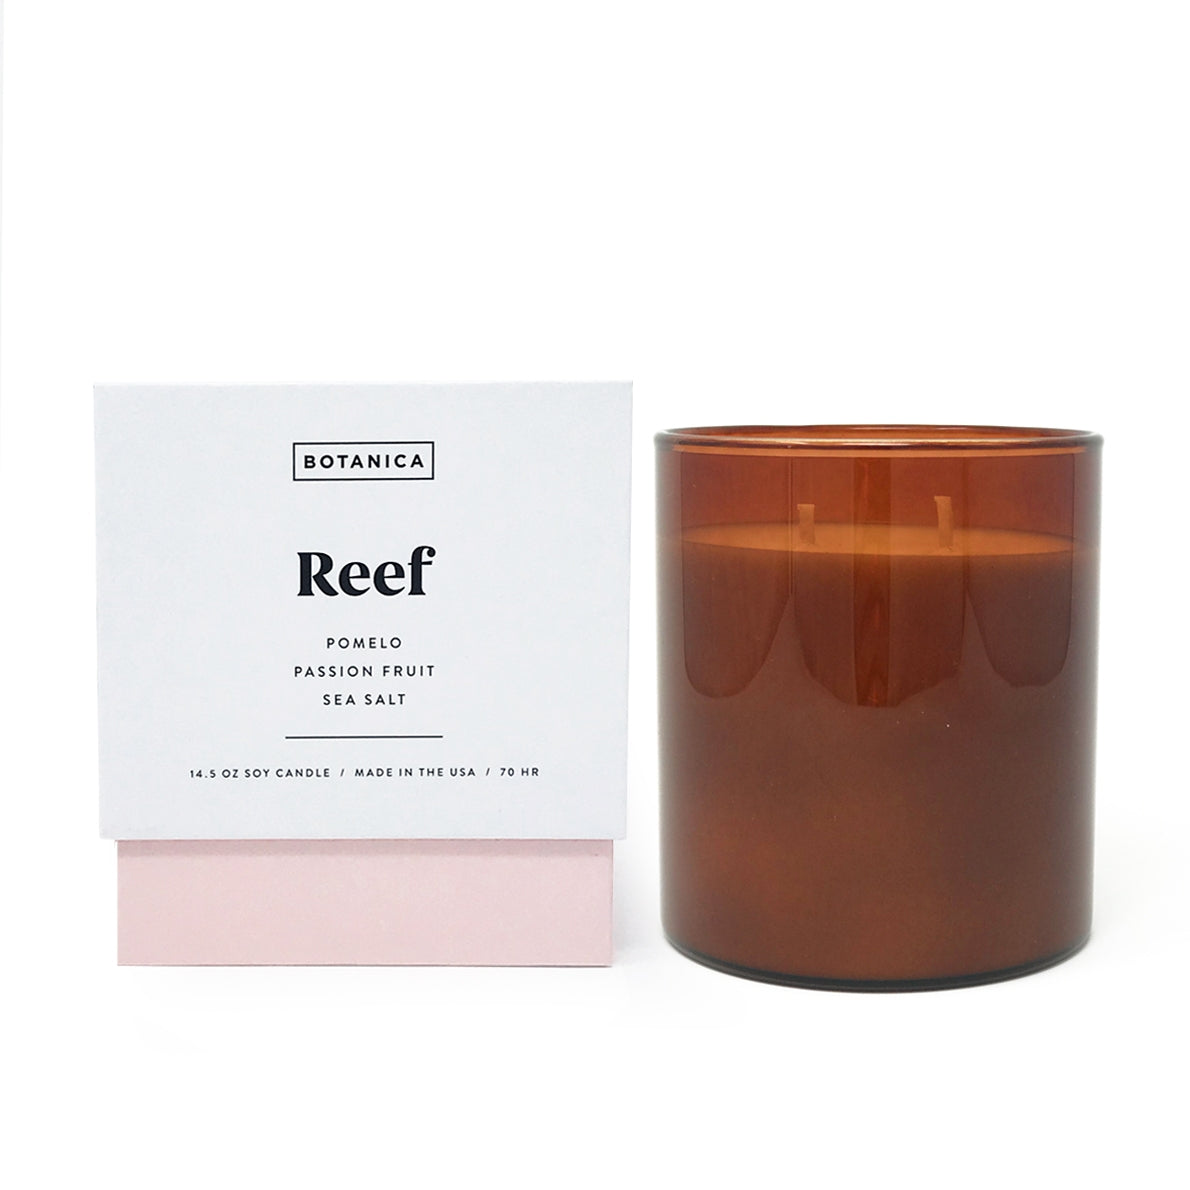 Reef Pomelo, Passion Fruit, Sea Salt Soy Wax Candle